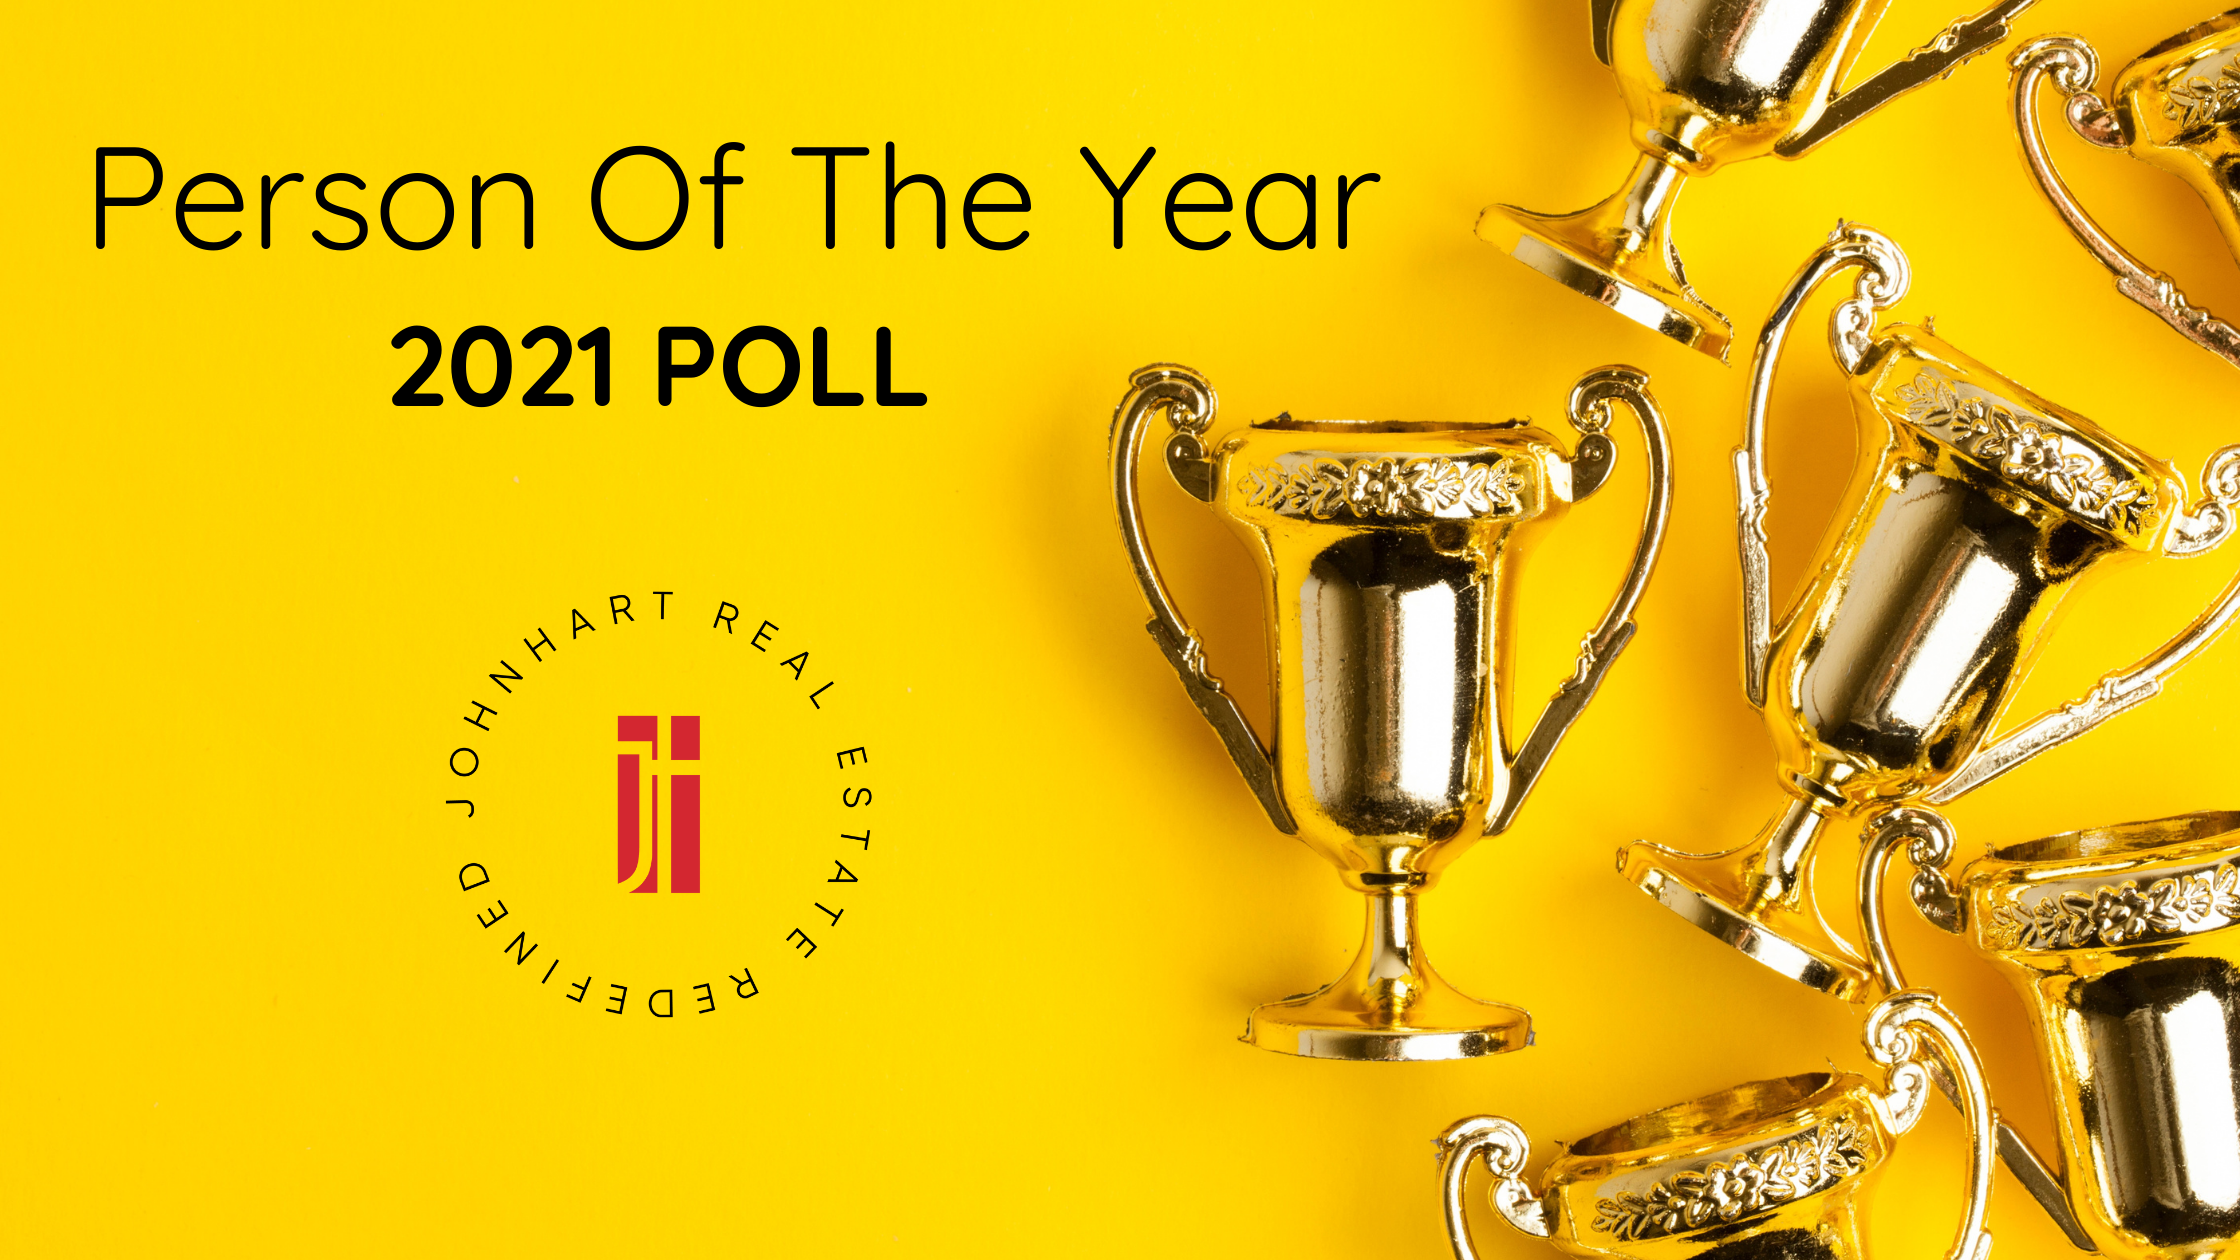 JohnHart Person Of the Year 2021 Poll